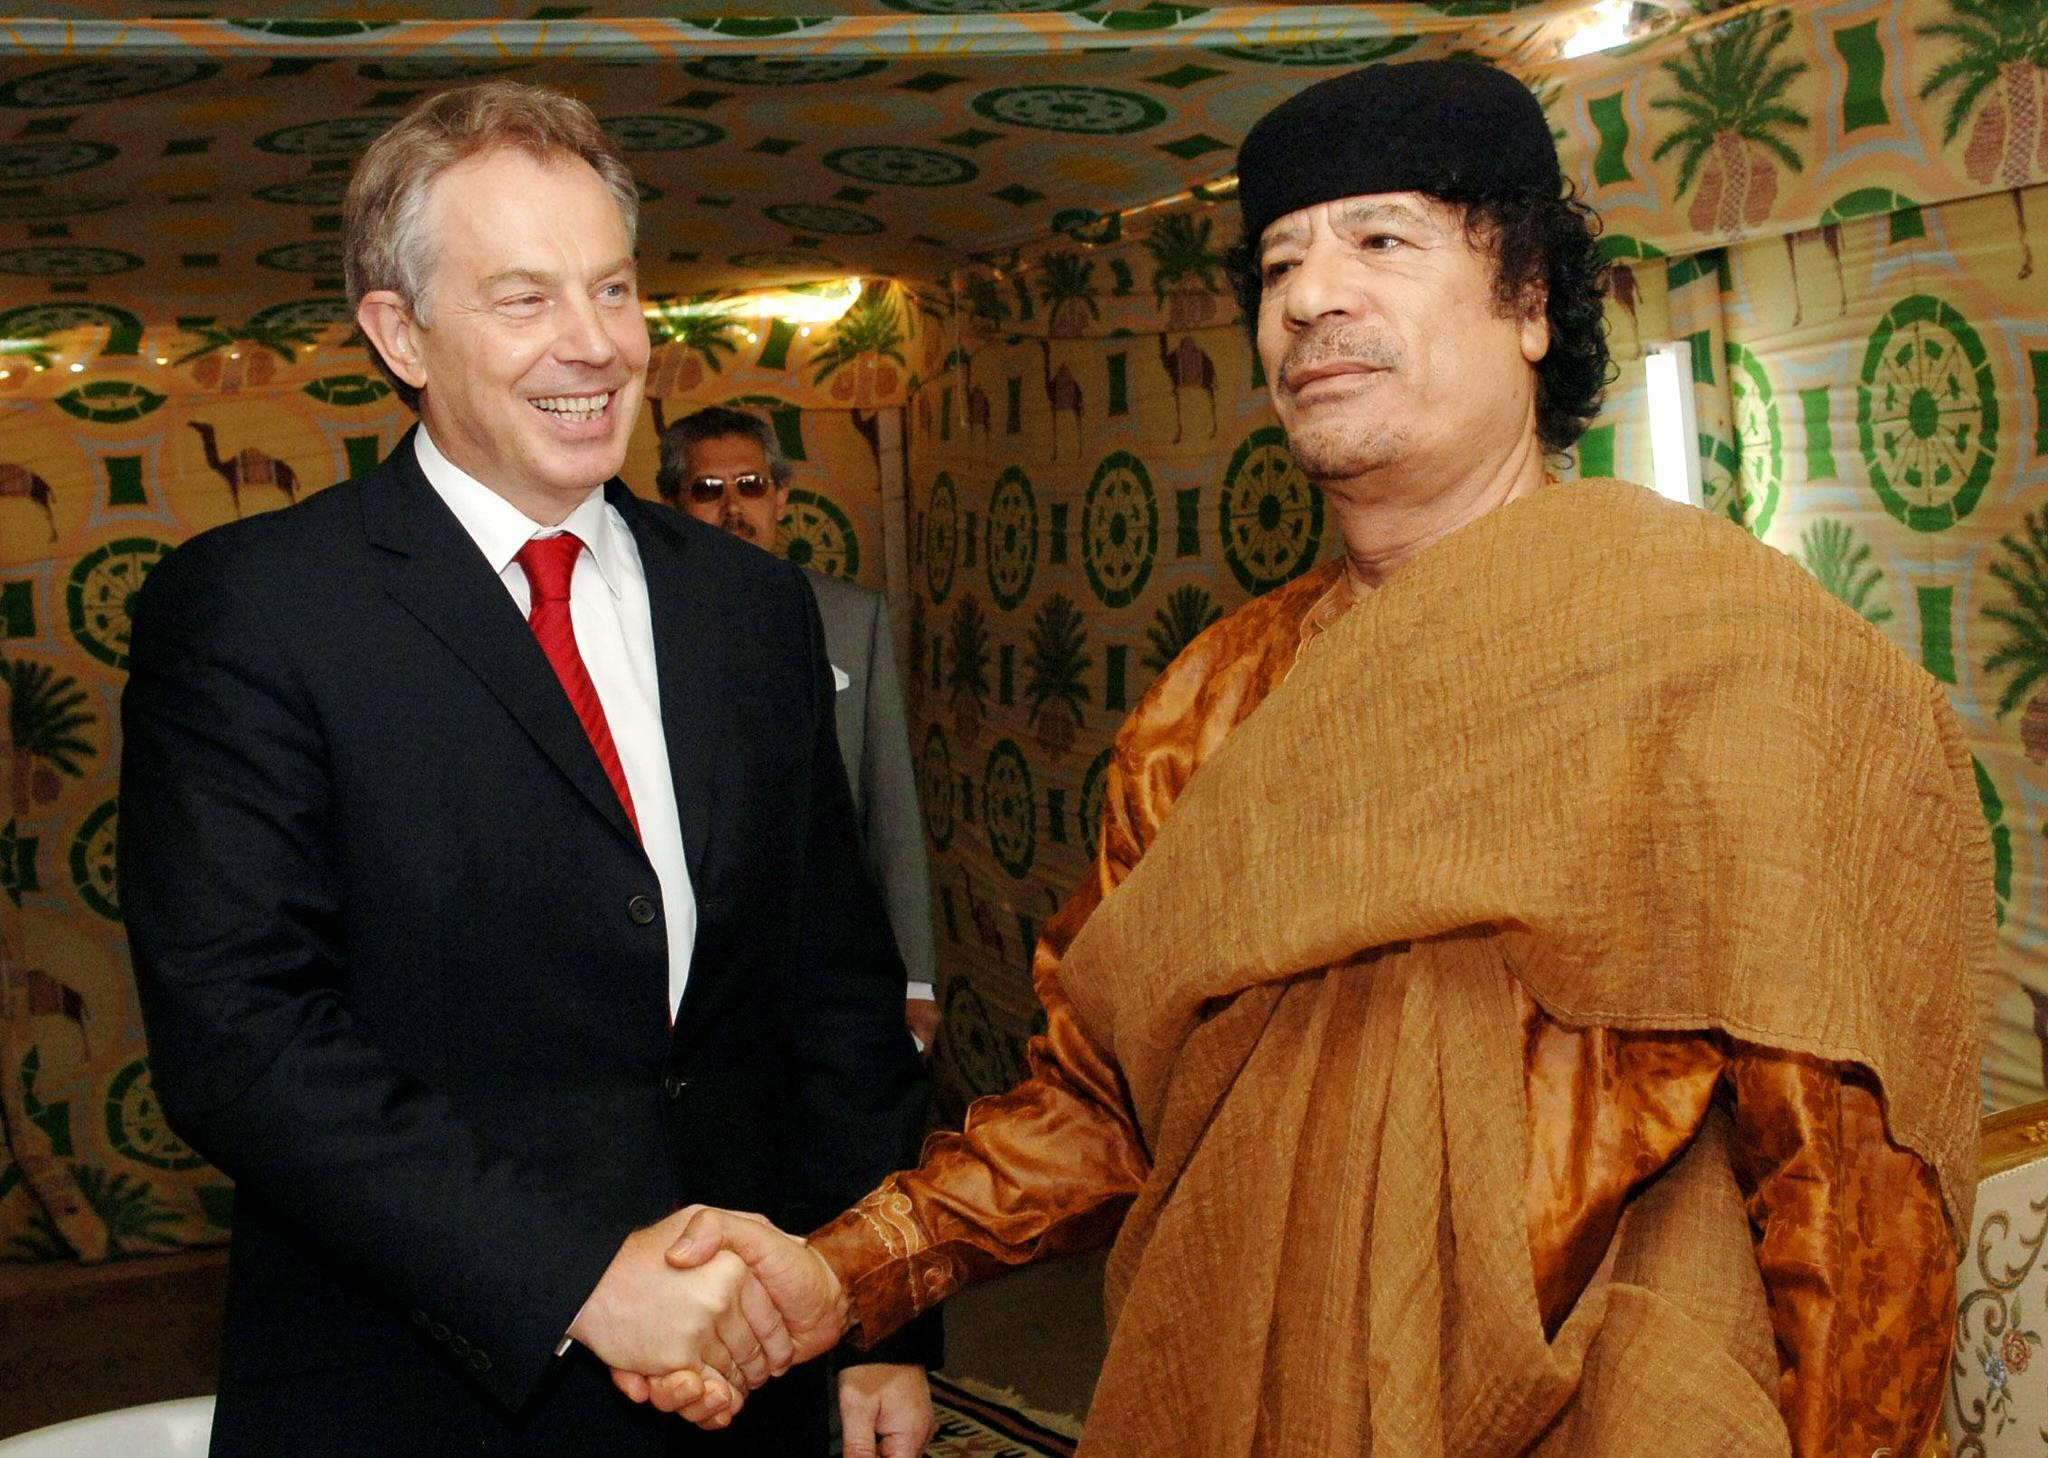 Prime Minister Tony Blair meeting Libyan leader Colonel Muammar Gaddafi at his desert base outside Sirte, south of Tripoli on May 29, 2007.